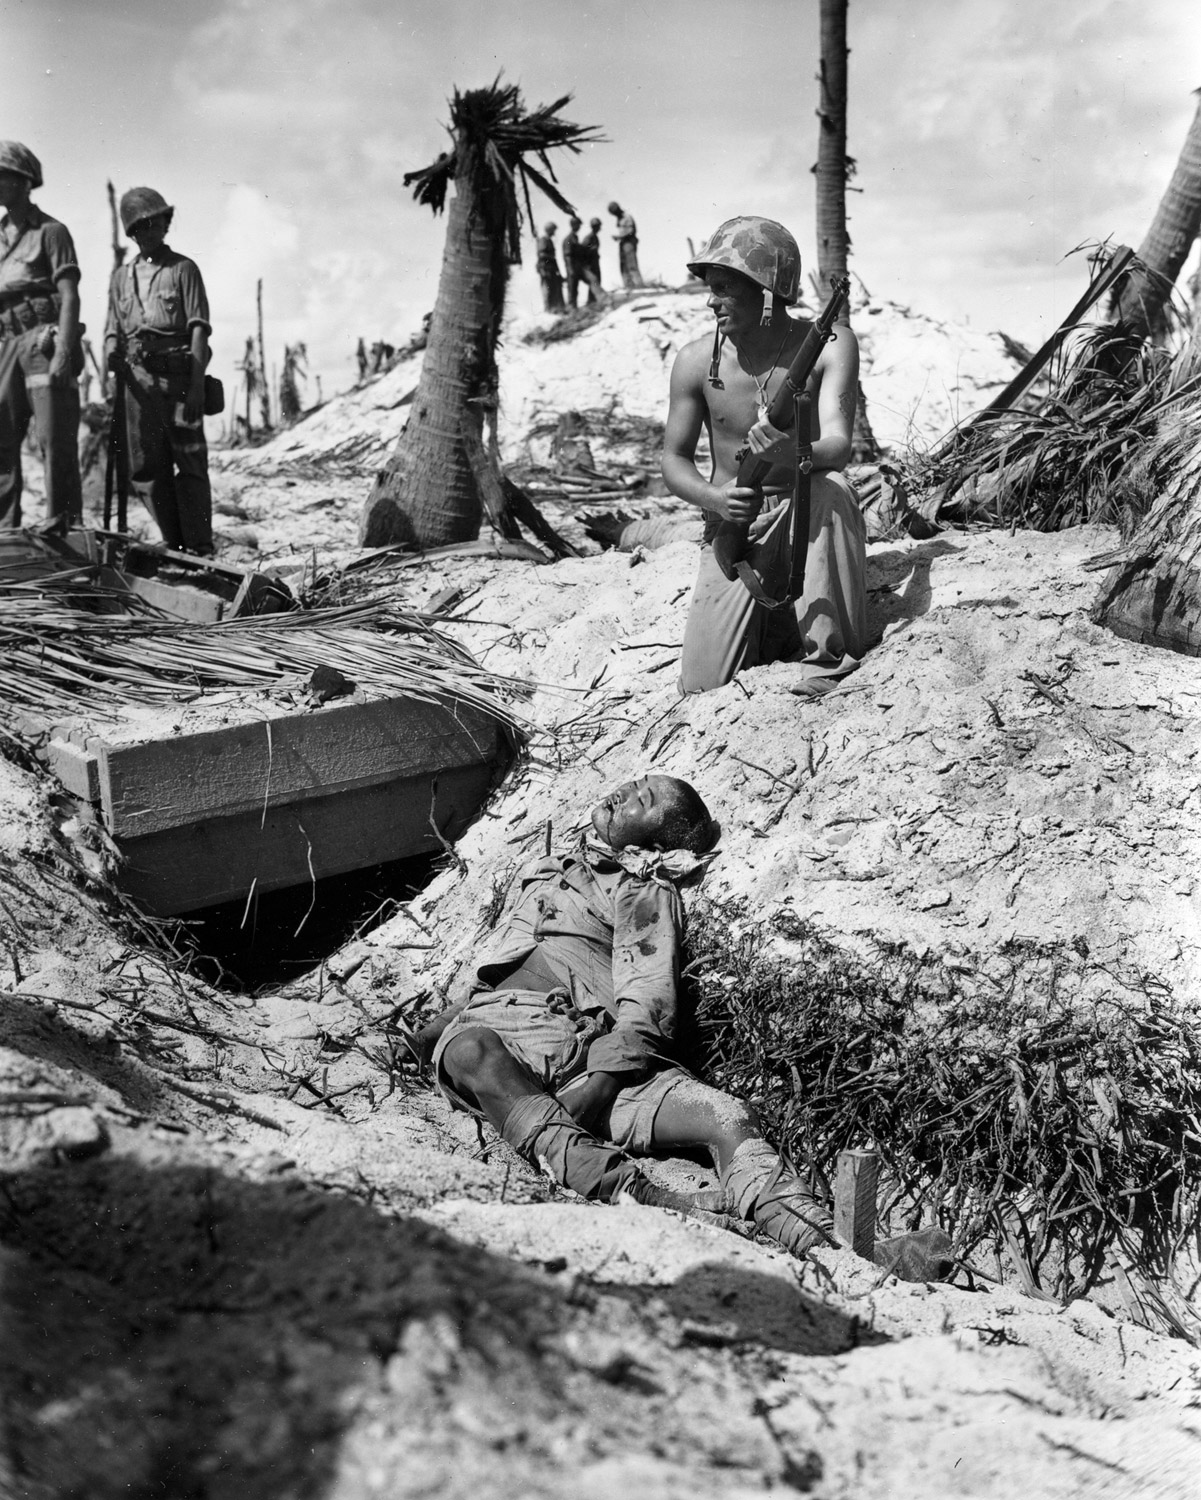 A Marine poses near a Japanese sniper he killed during the invasion of the Gilbert Islands in World War II, November 21, 1943.